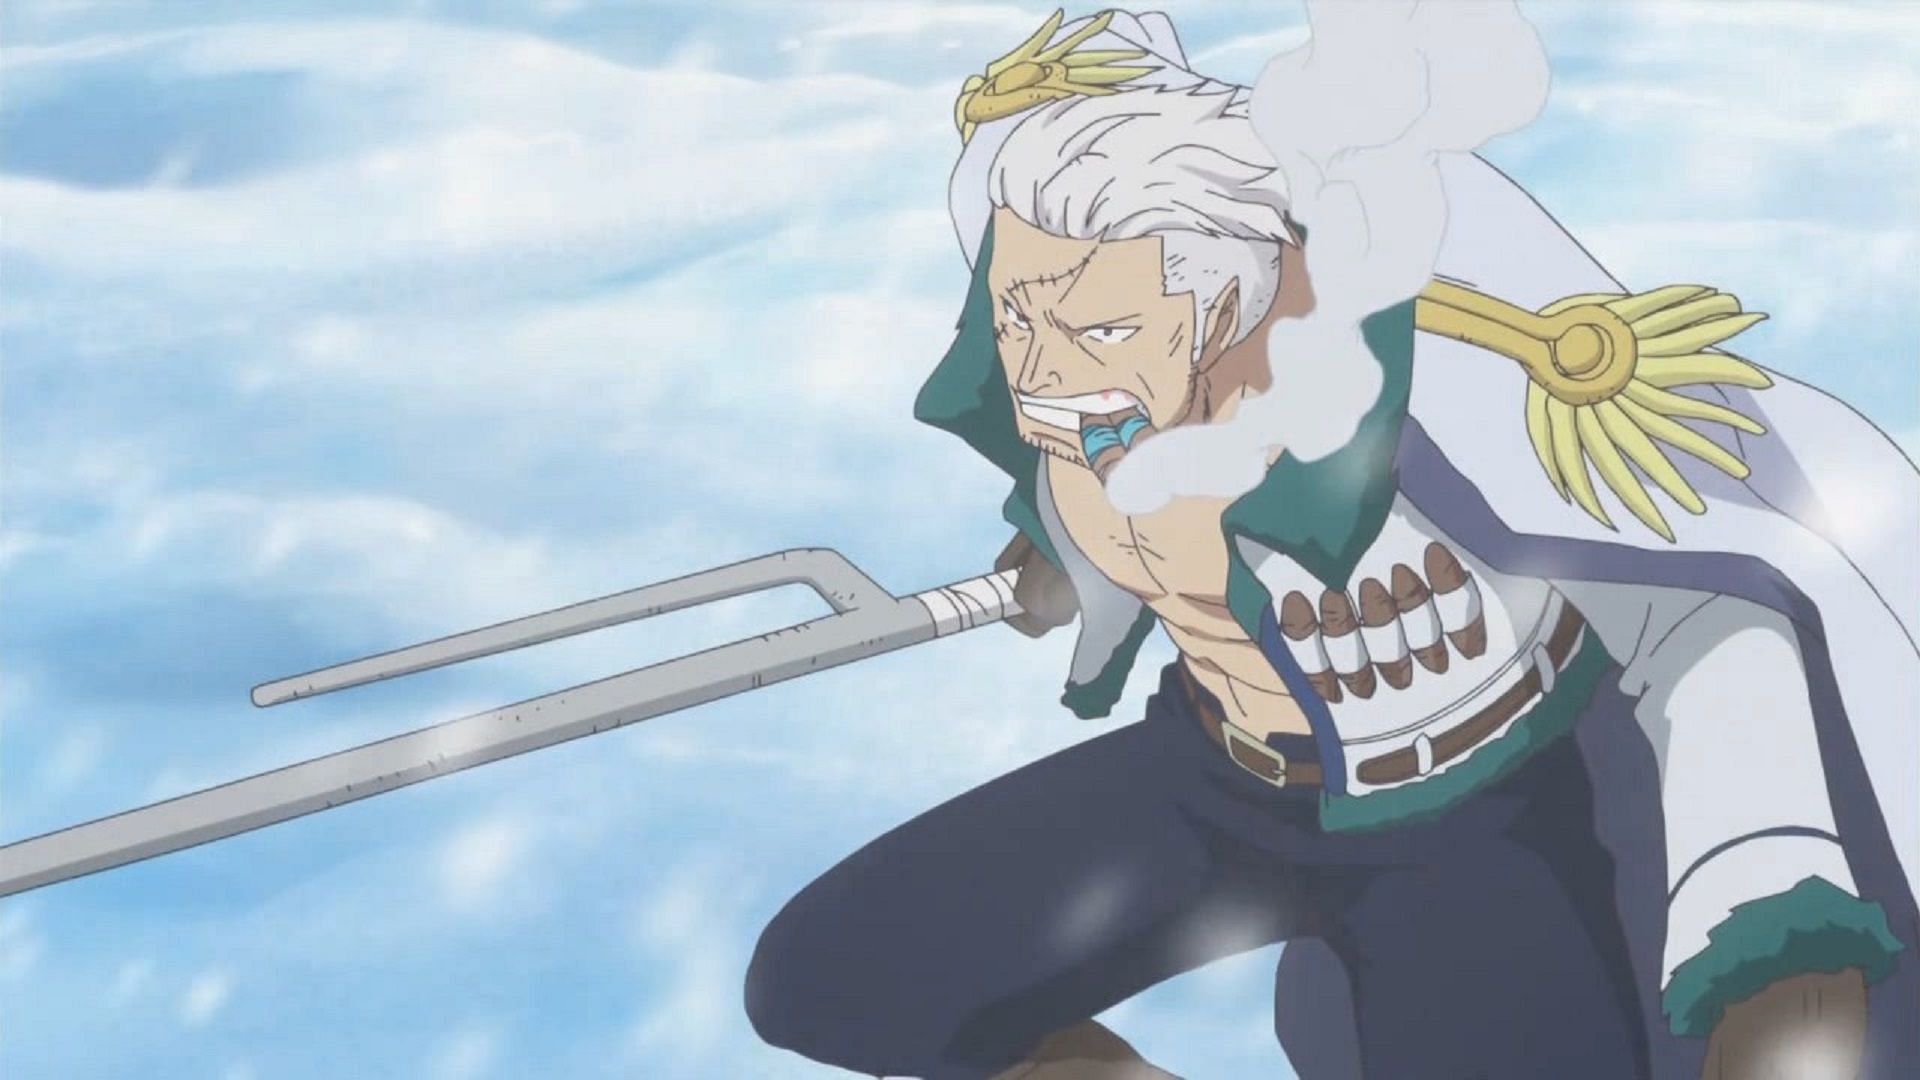 Vice-admiral Smoker is likely to appear in the next One Piece chapters, and to be revealed as a member of The secret group SWORD (Image via Toei Animation, One Piece)